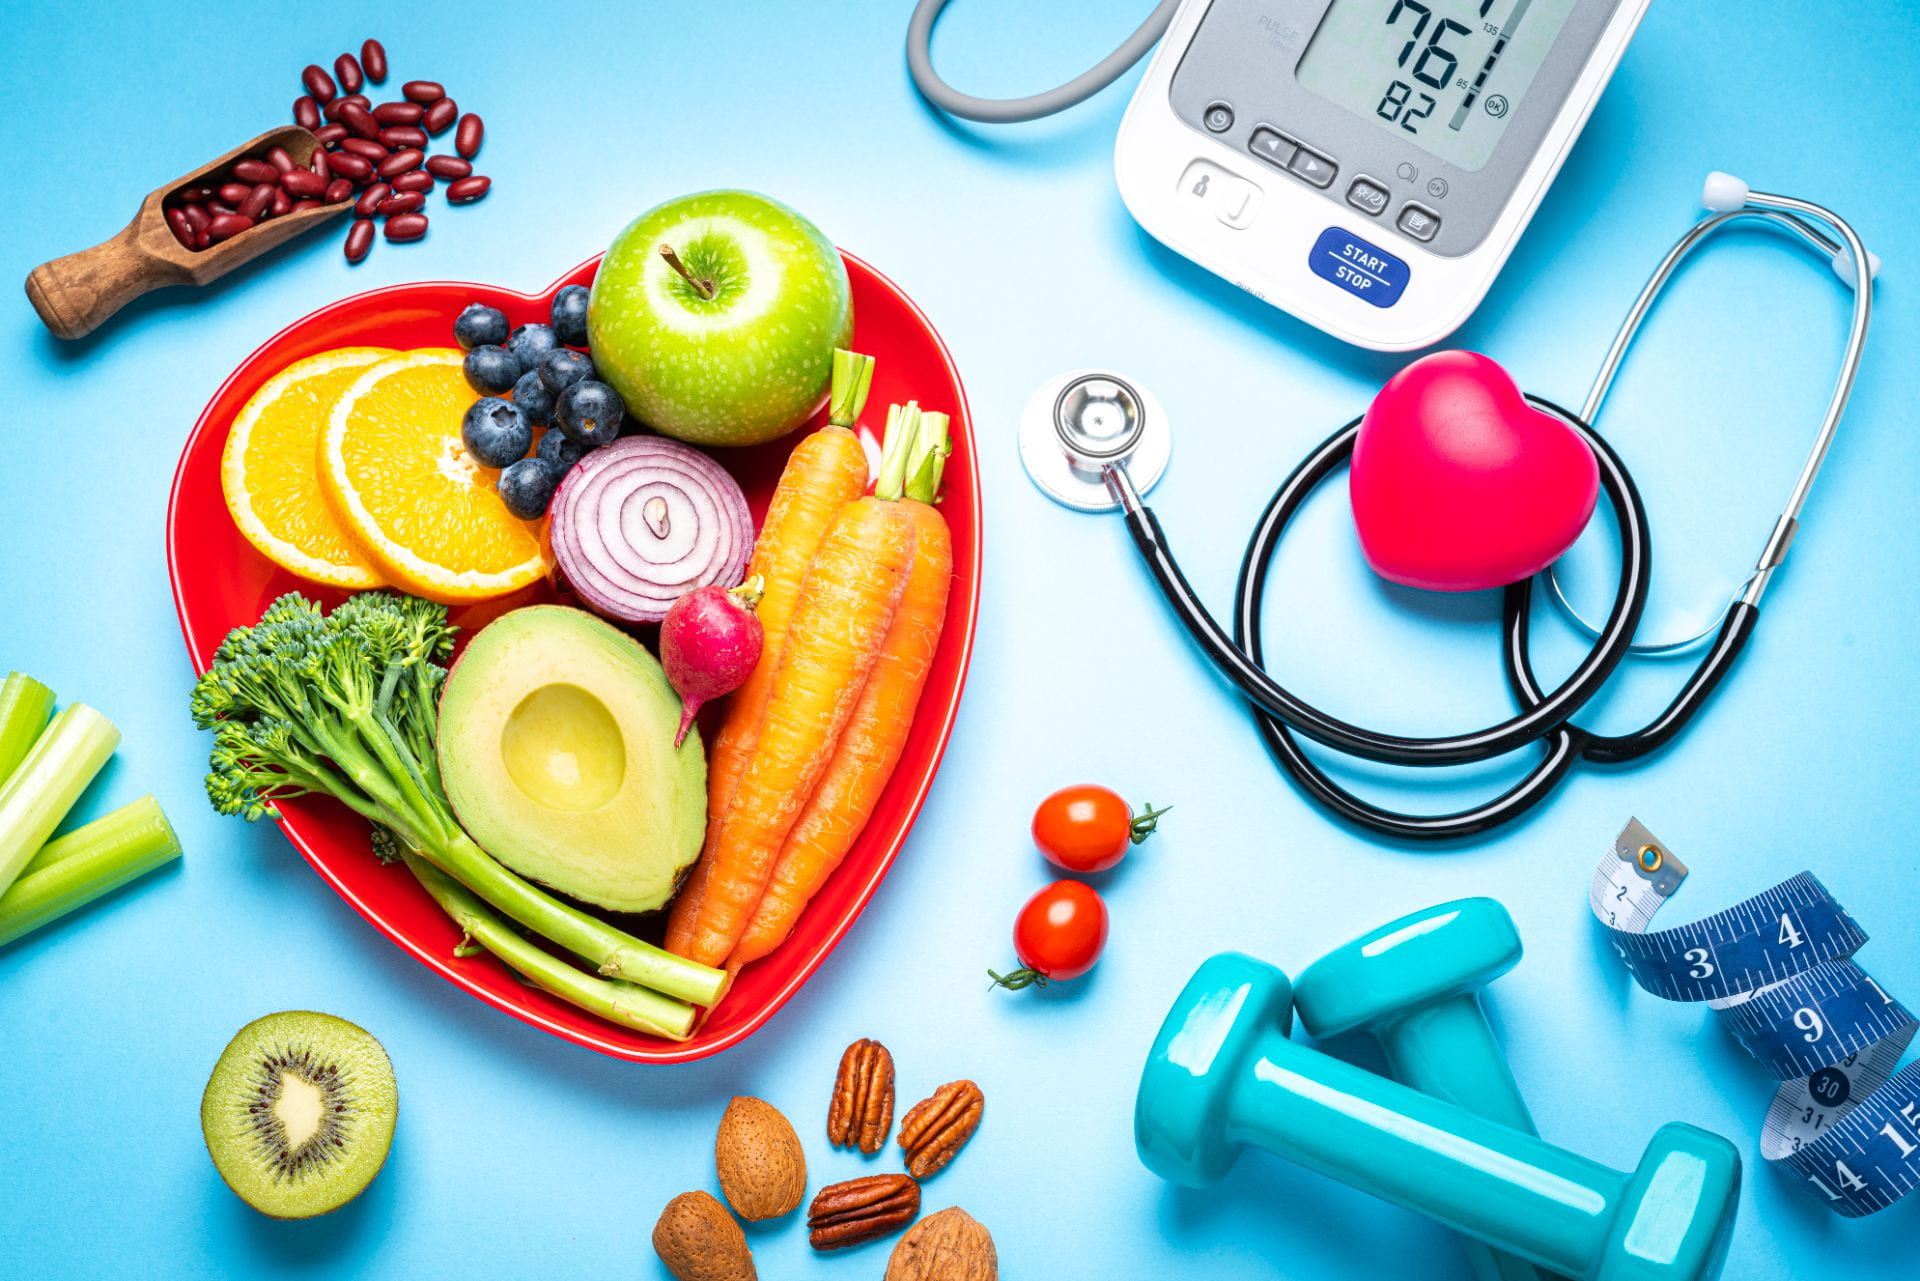 Healthy lifestyle concepts: red heart shape plate with fresh organic fruits and vegetables shot on blue background. A digital blood pressure monitor, doctor stethoscope, dumbbells and tape measure are beside the plate  This type of foods are rich in antioxidants and flavonoids that prevents heart diseases, lower cholesterol and help to keep a well balanced diet.